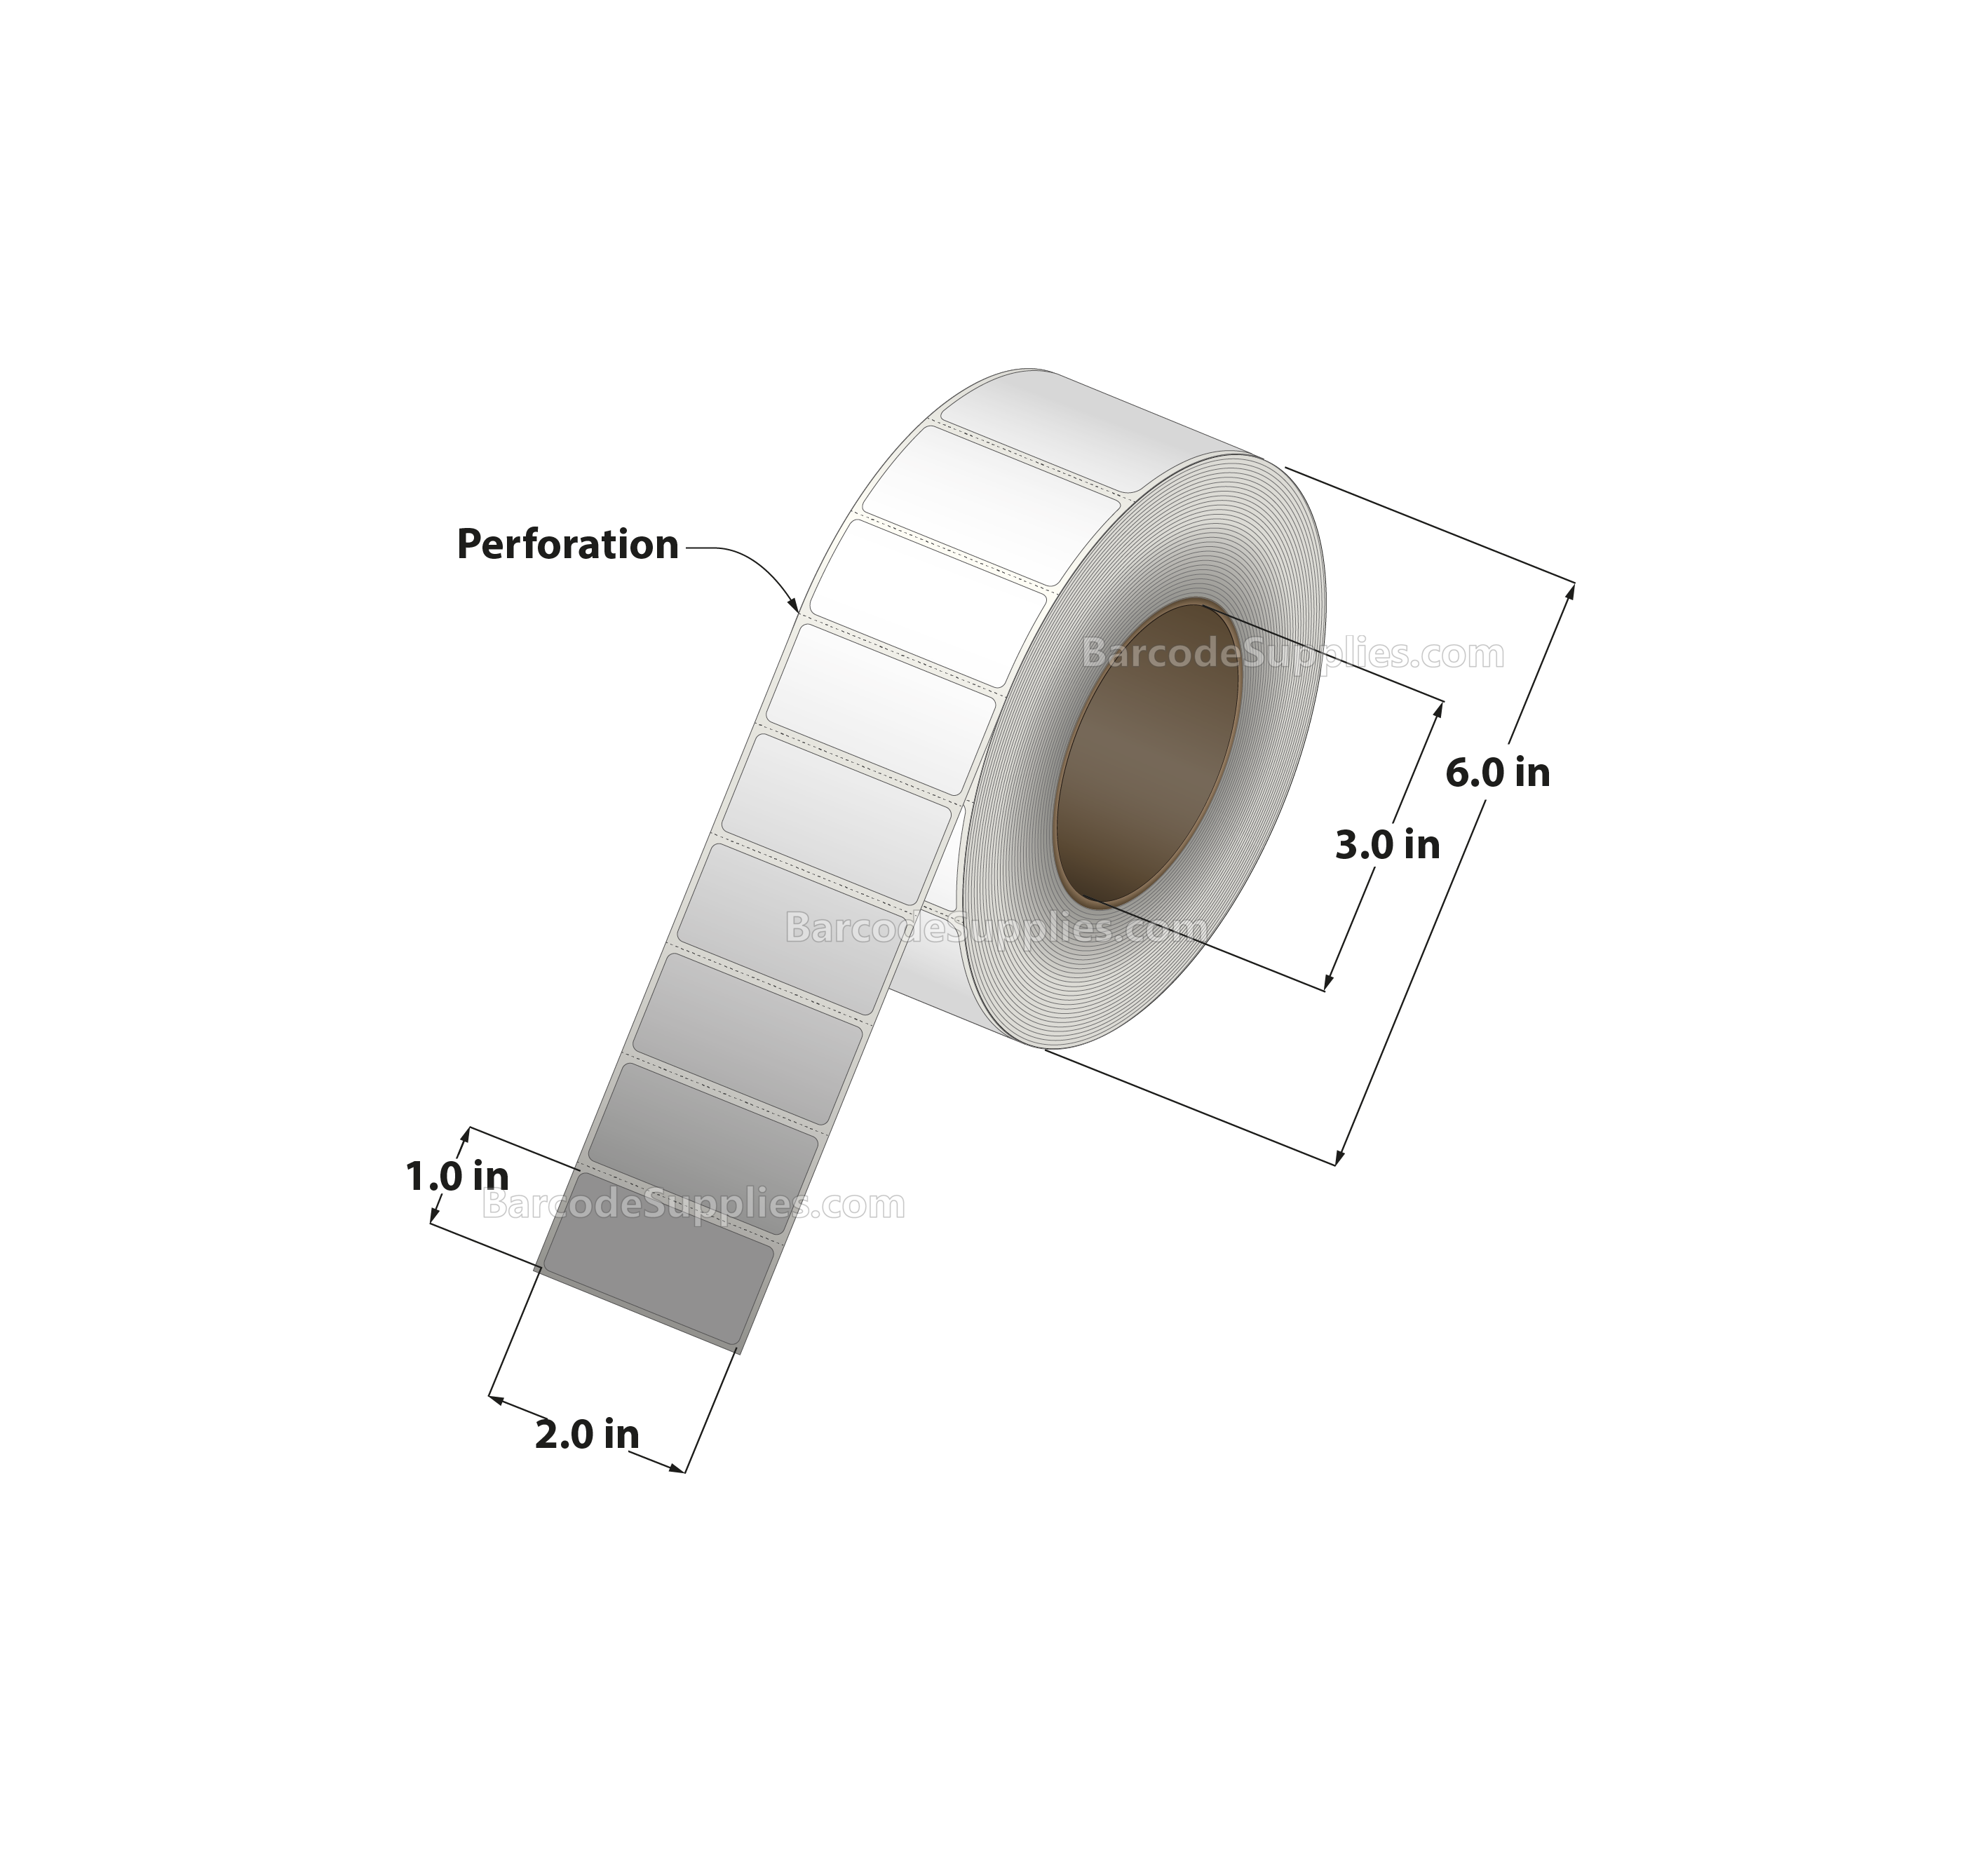 2 x 1 Direct Thermal White Labels With Acrylic Adhesive - Perforated - 2750 Labels Per Roll - Carton Of 12 Rolls - 33000 Labels Total - MPN: RD-2-1-2750-3